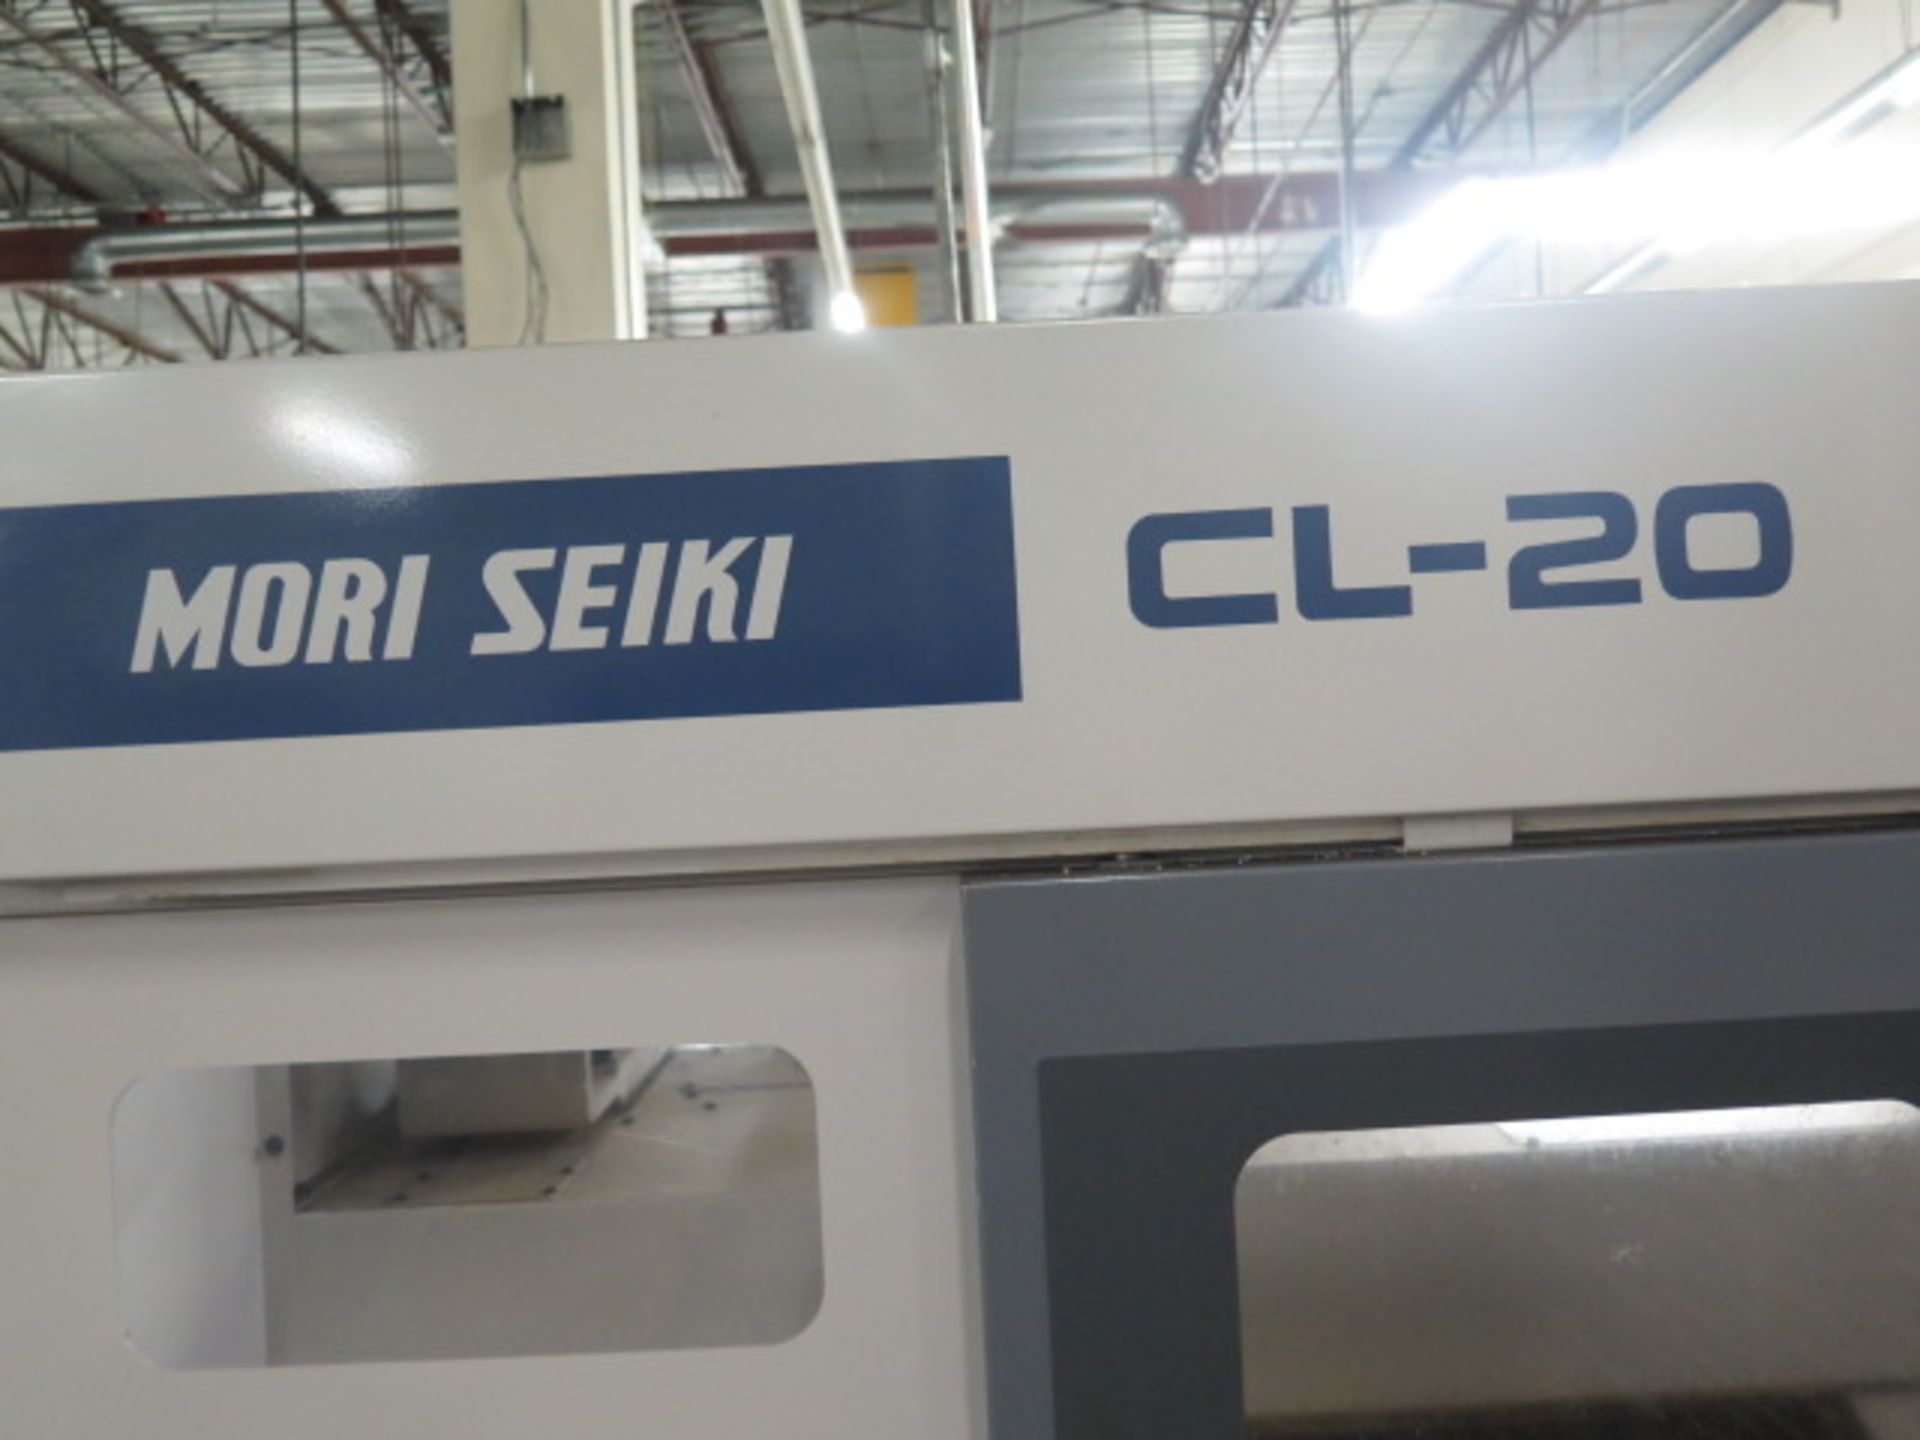 Mori Seiki CL-20A CNC Turning Center s/n 304 w/ Yasnac Controls, 8-Station Turret, Parts Catcher, 8” - Image 11 of 15